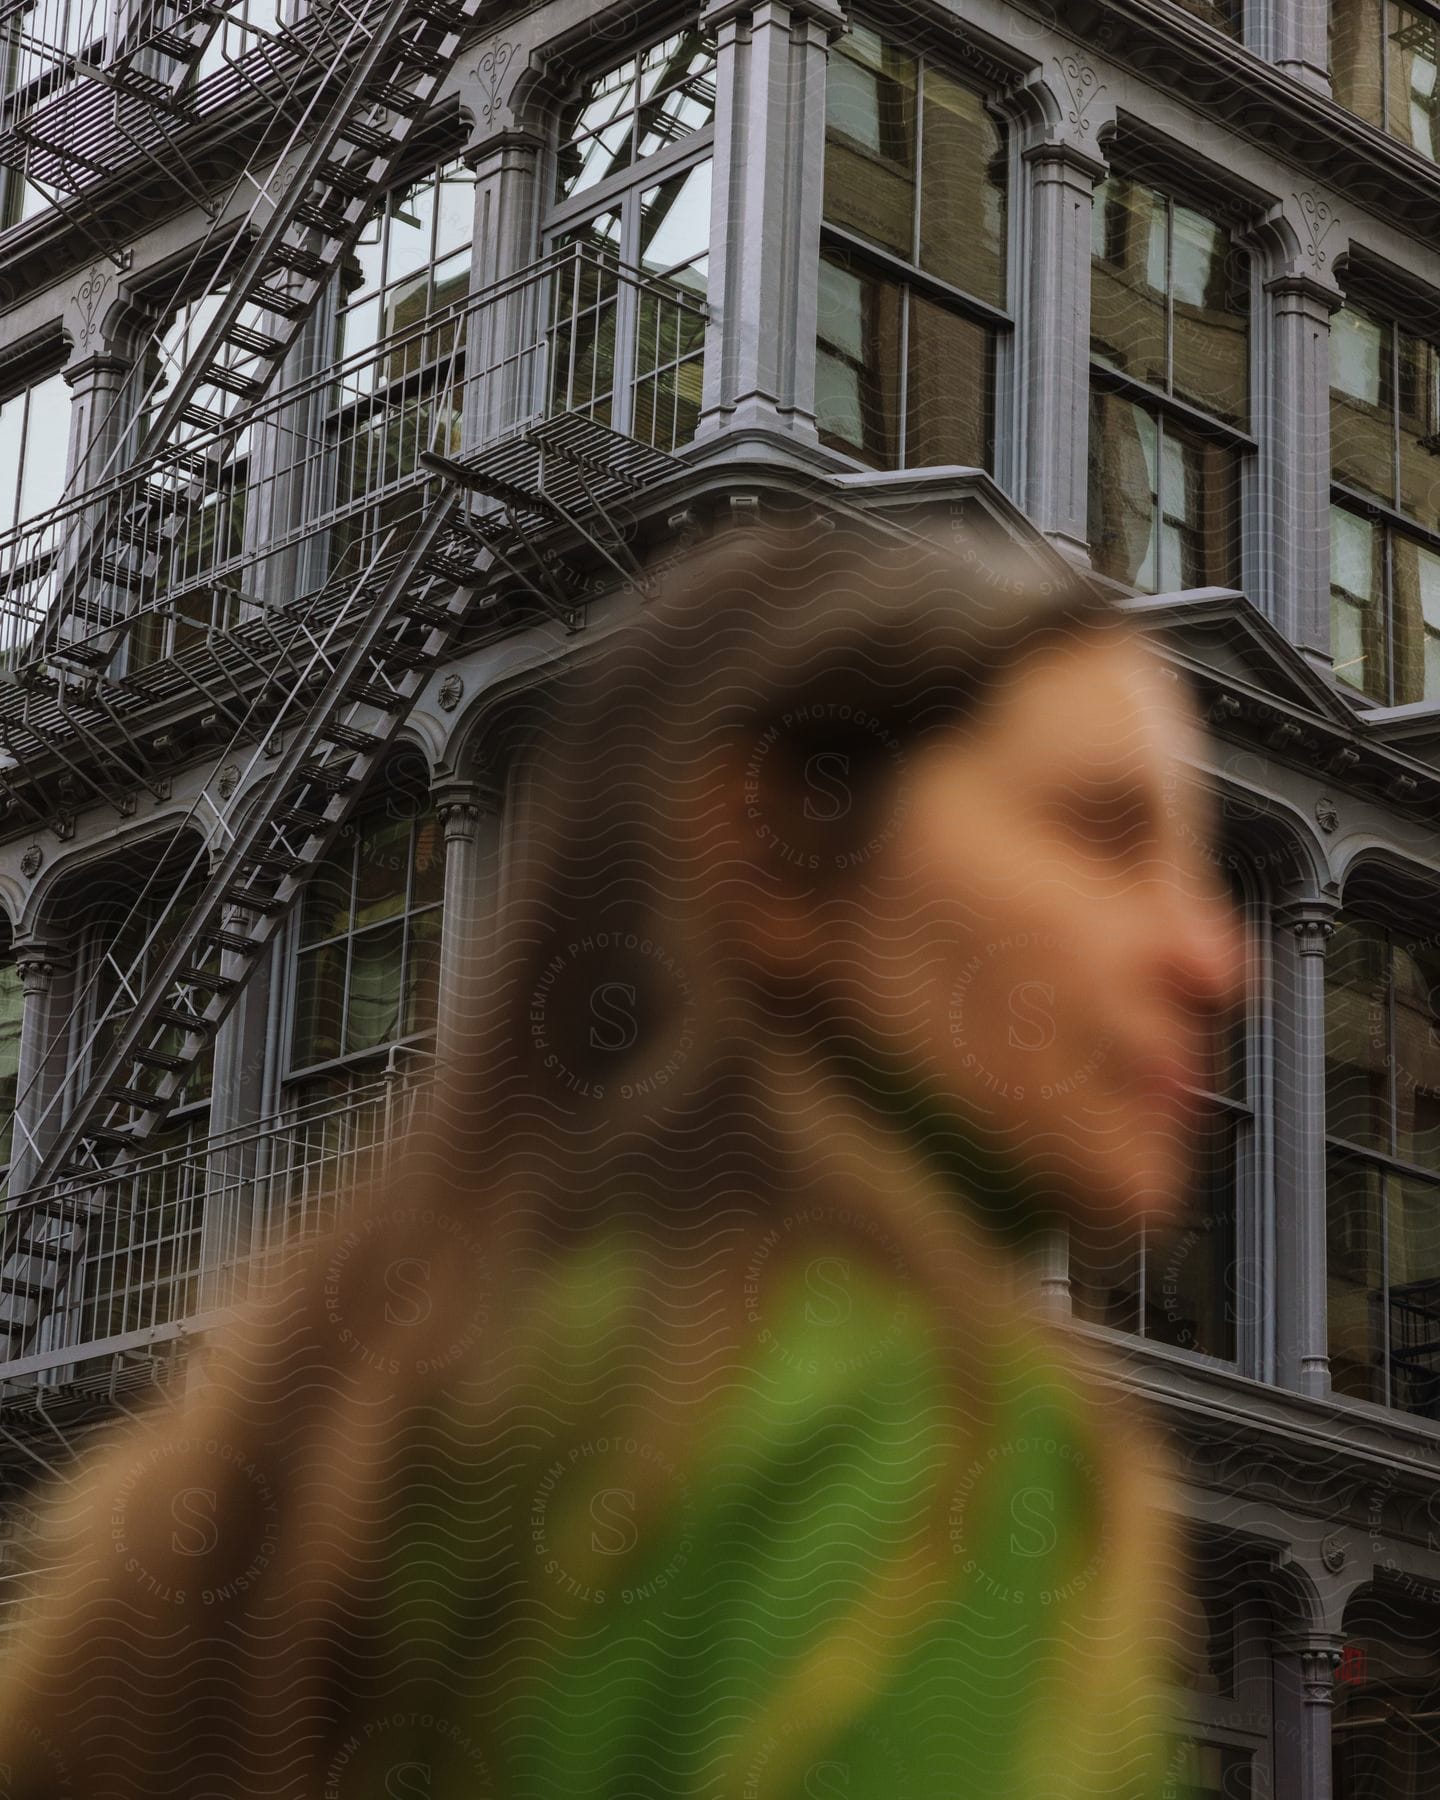 Blurry face of a woman standing in front of a grey, multi-story apartment building.